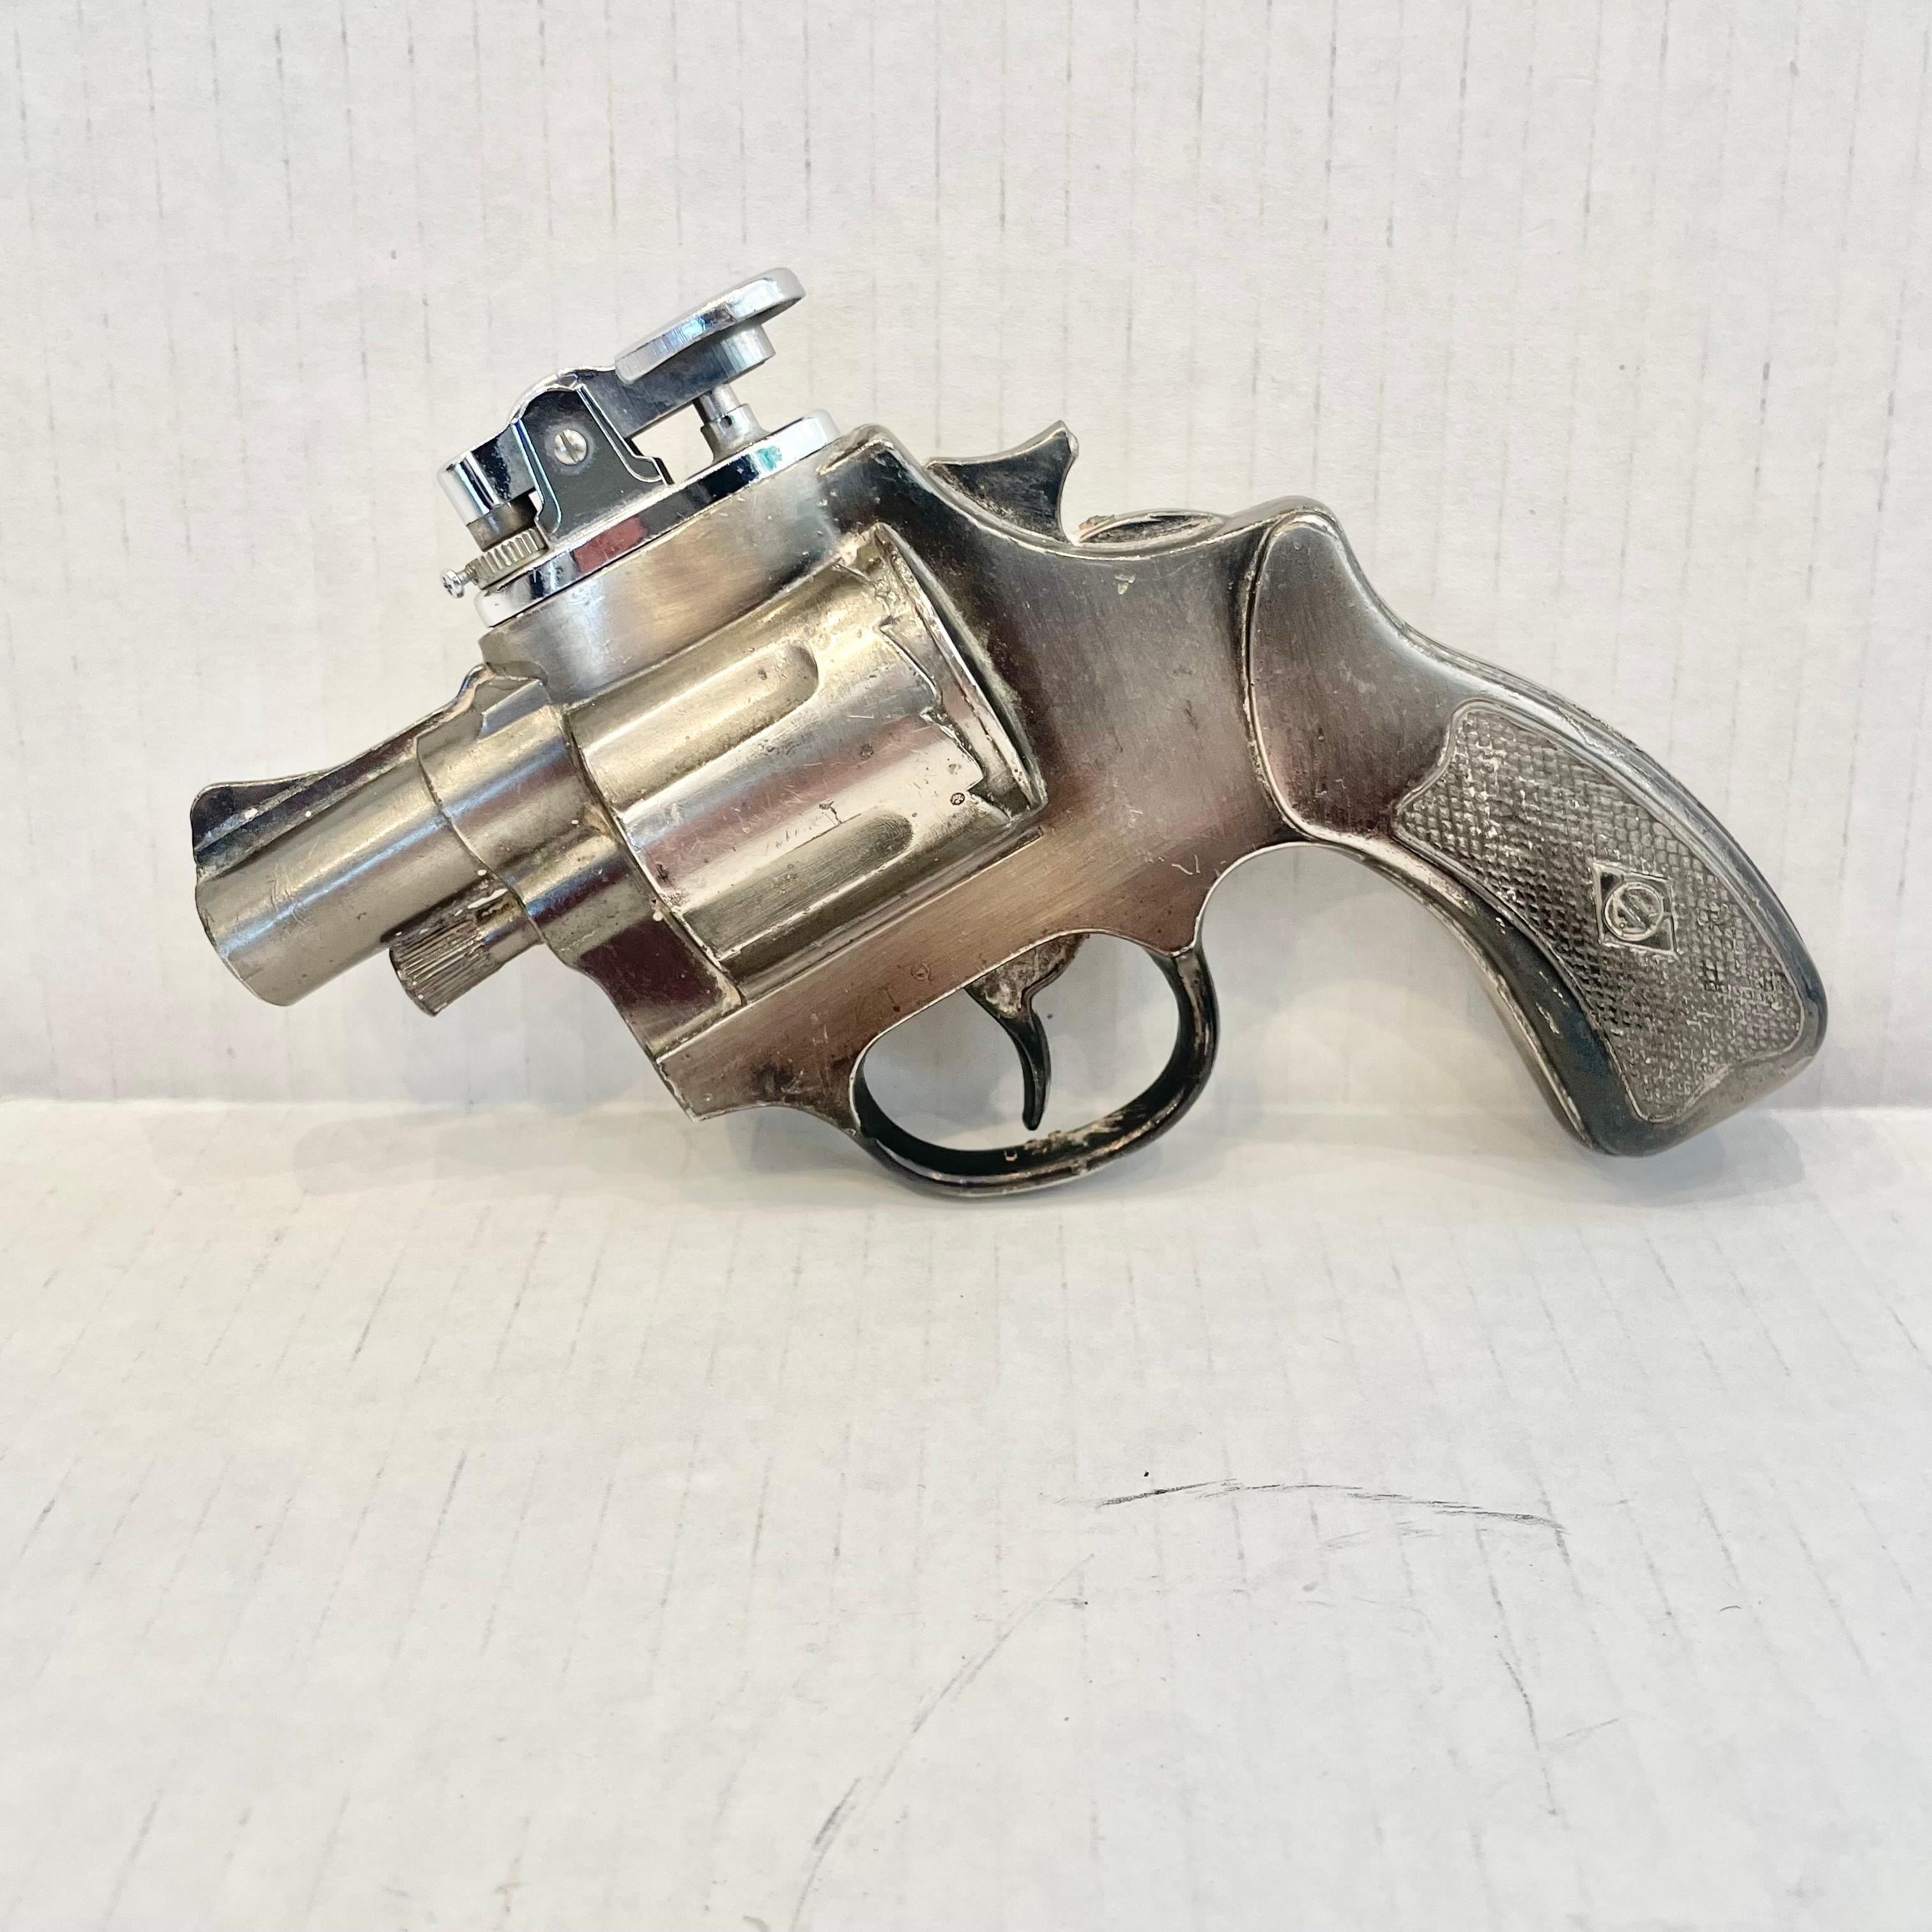 Cool vintage table lighter in the shape of a revolver. Made completely of metal with a hollow body. Classic silver color with beautiful details like a checkered grip. Cool tobacco accessory and conversation piece. Working lighter. Very unusual